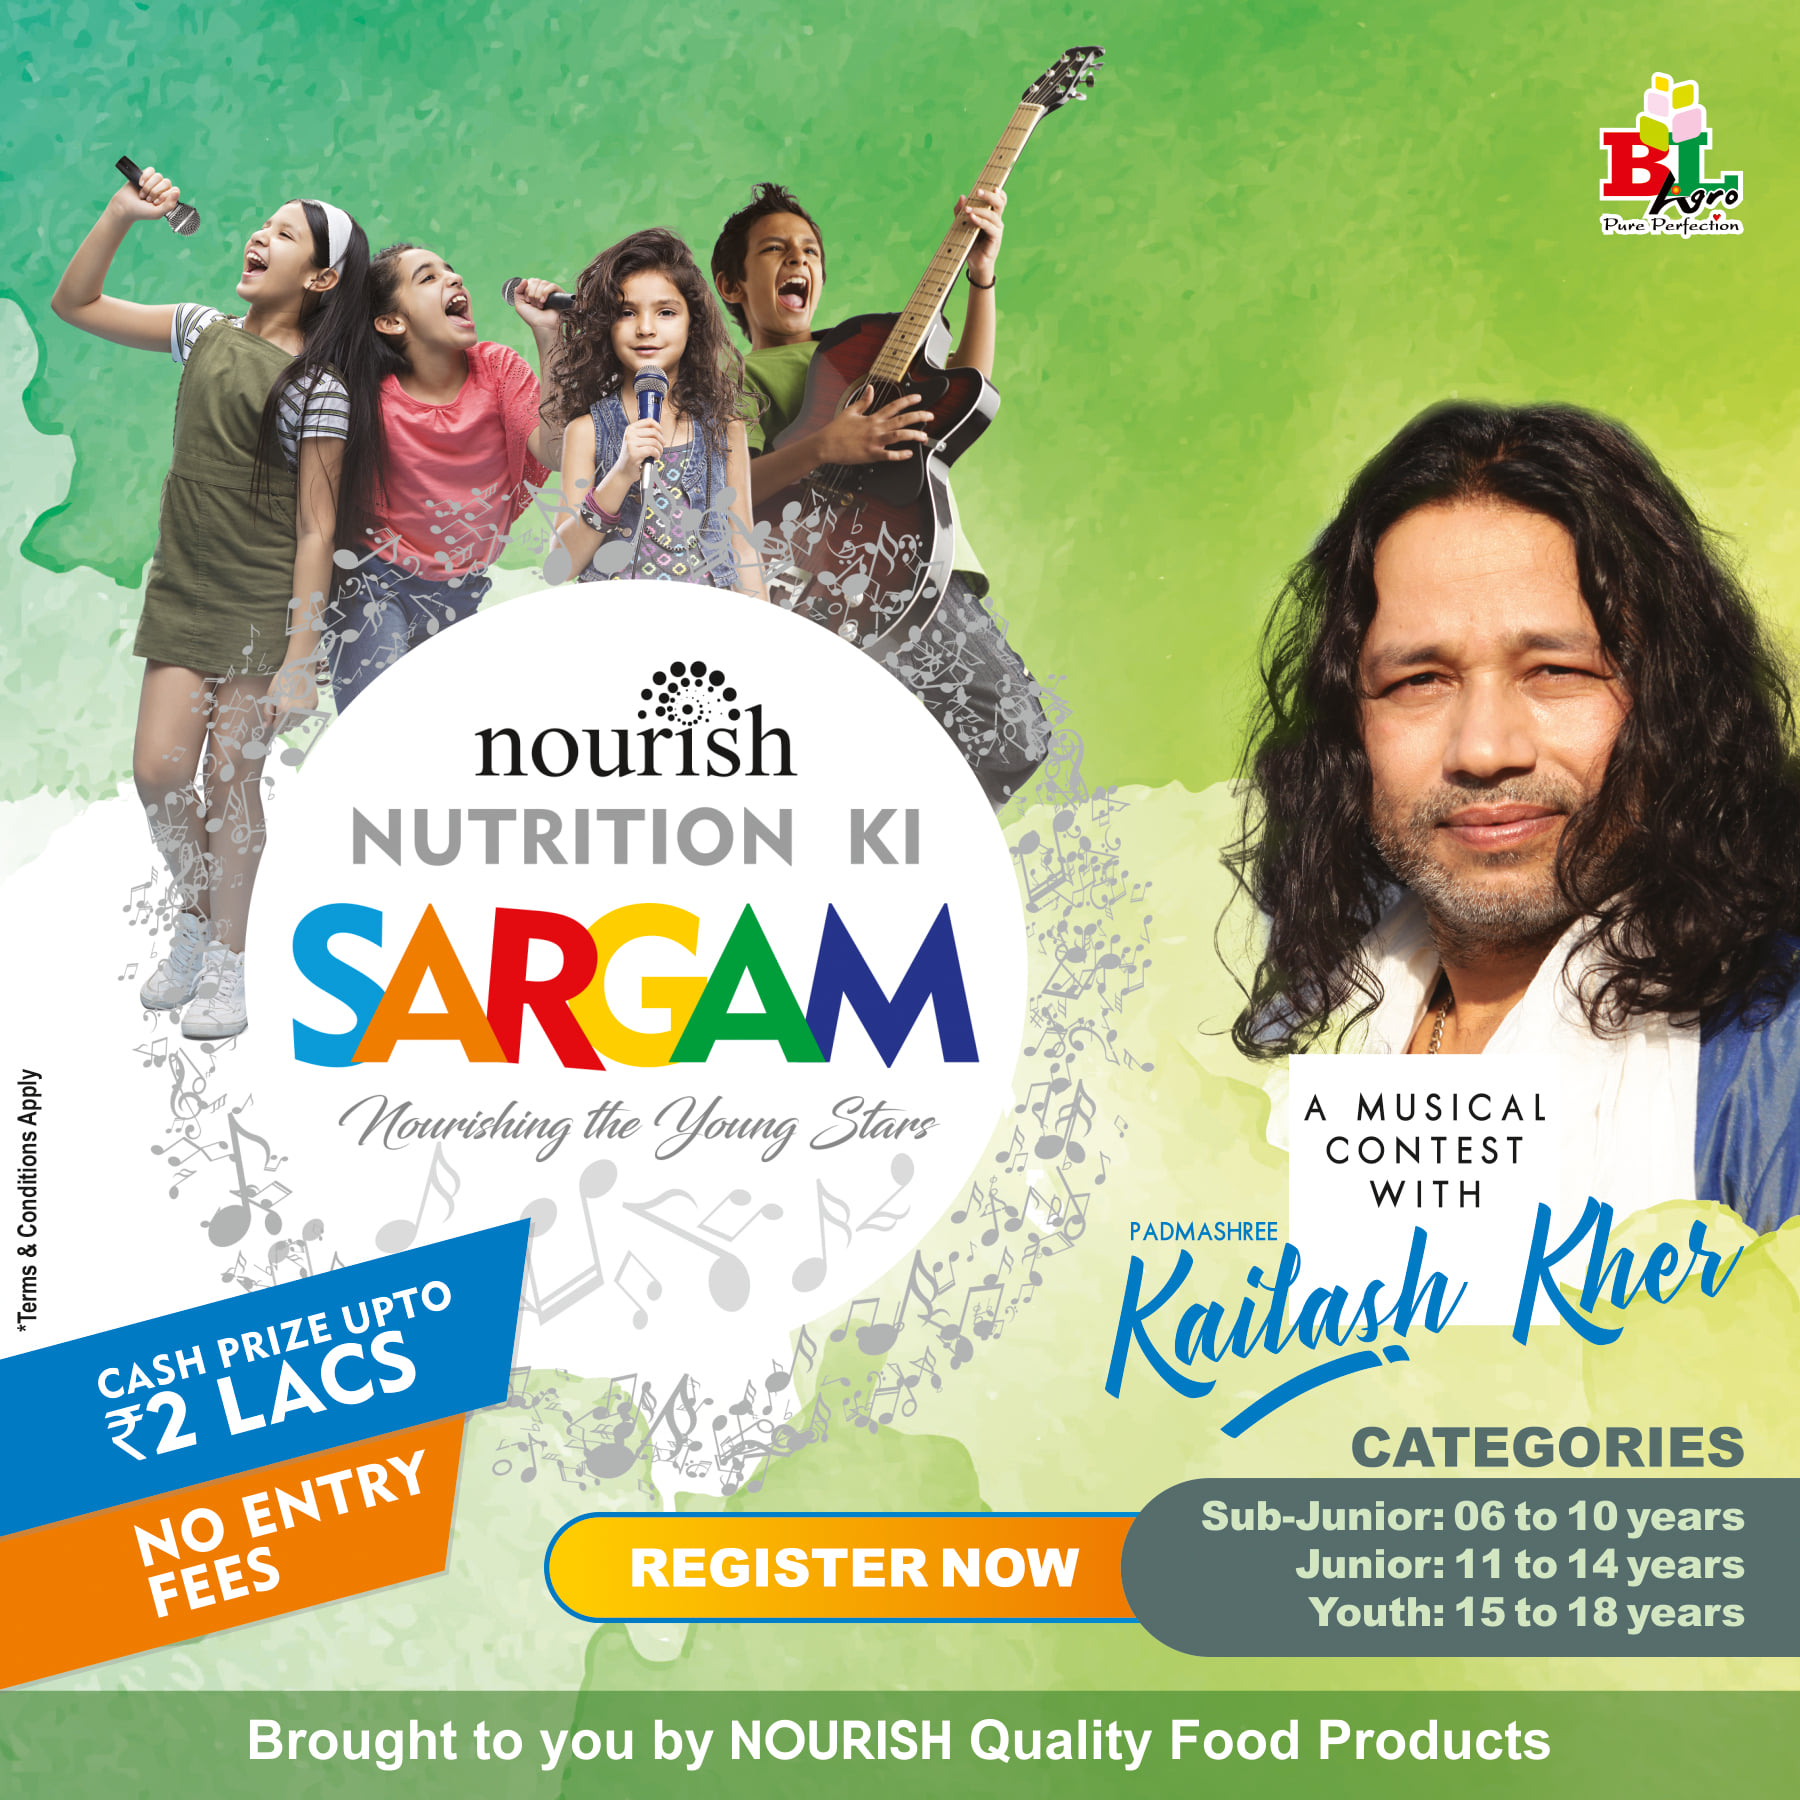 First Virtual Jingle Contest; Chance to Sing with Kailash Kher